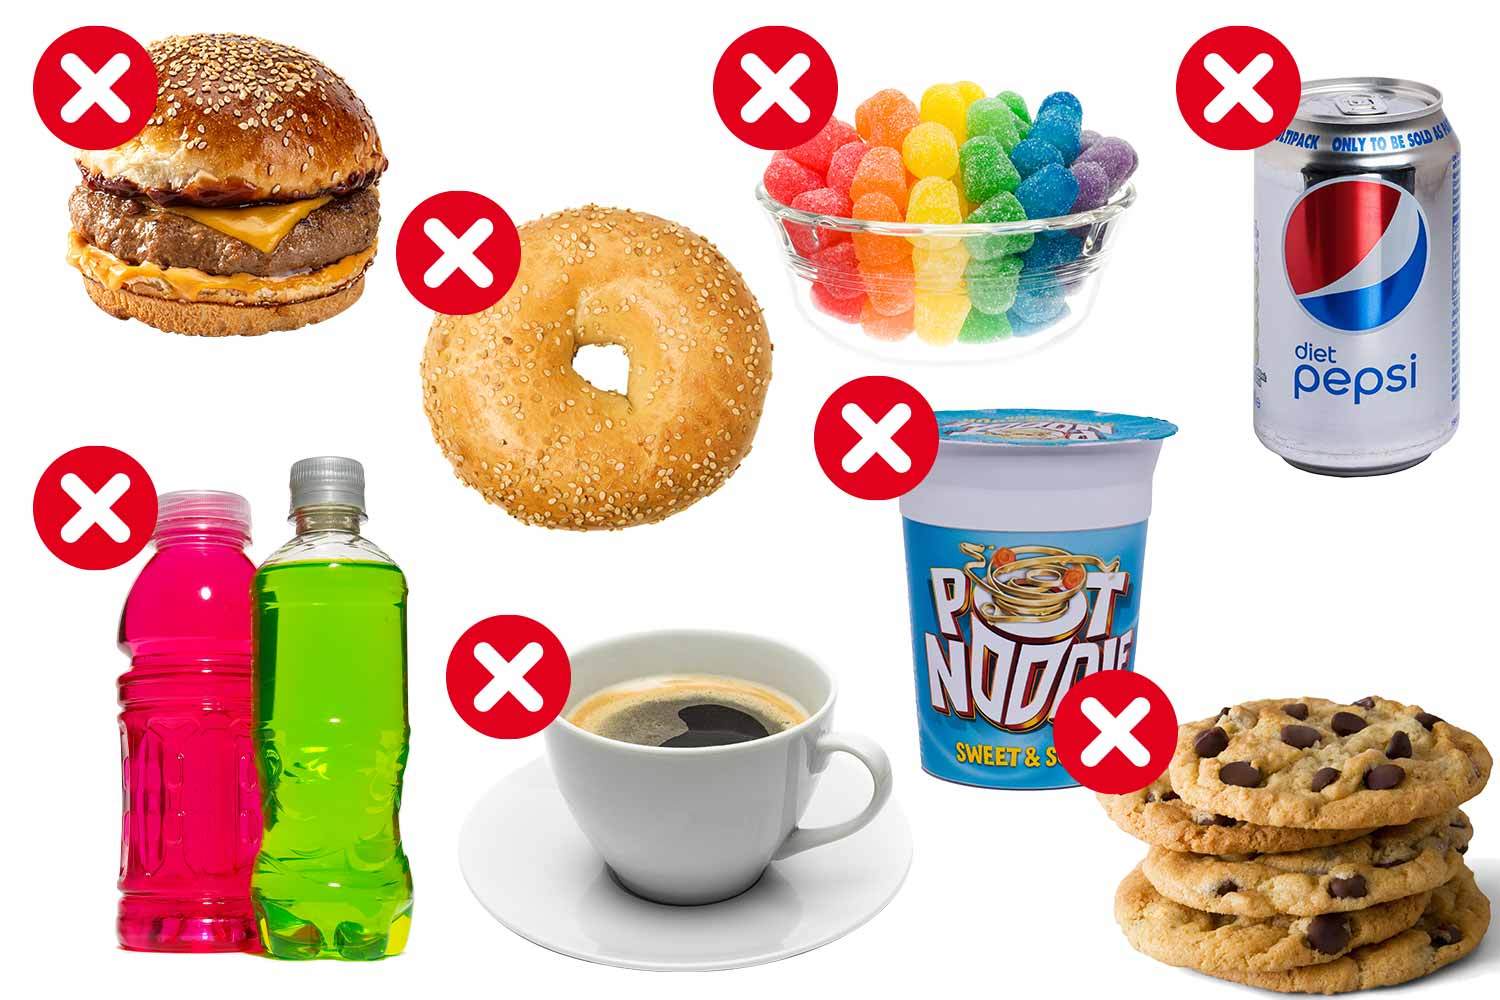 What foods to stop eating for quick weight loss?